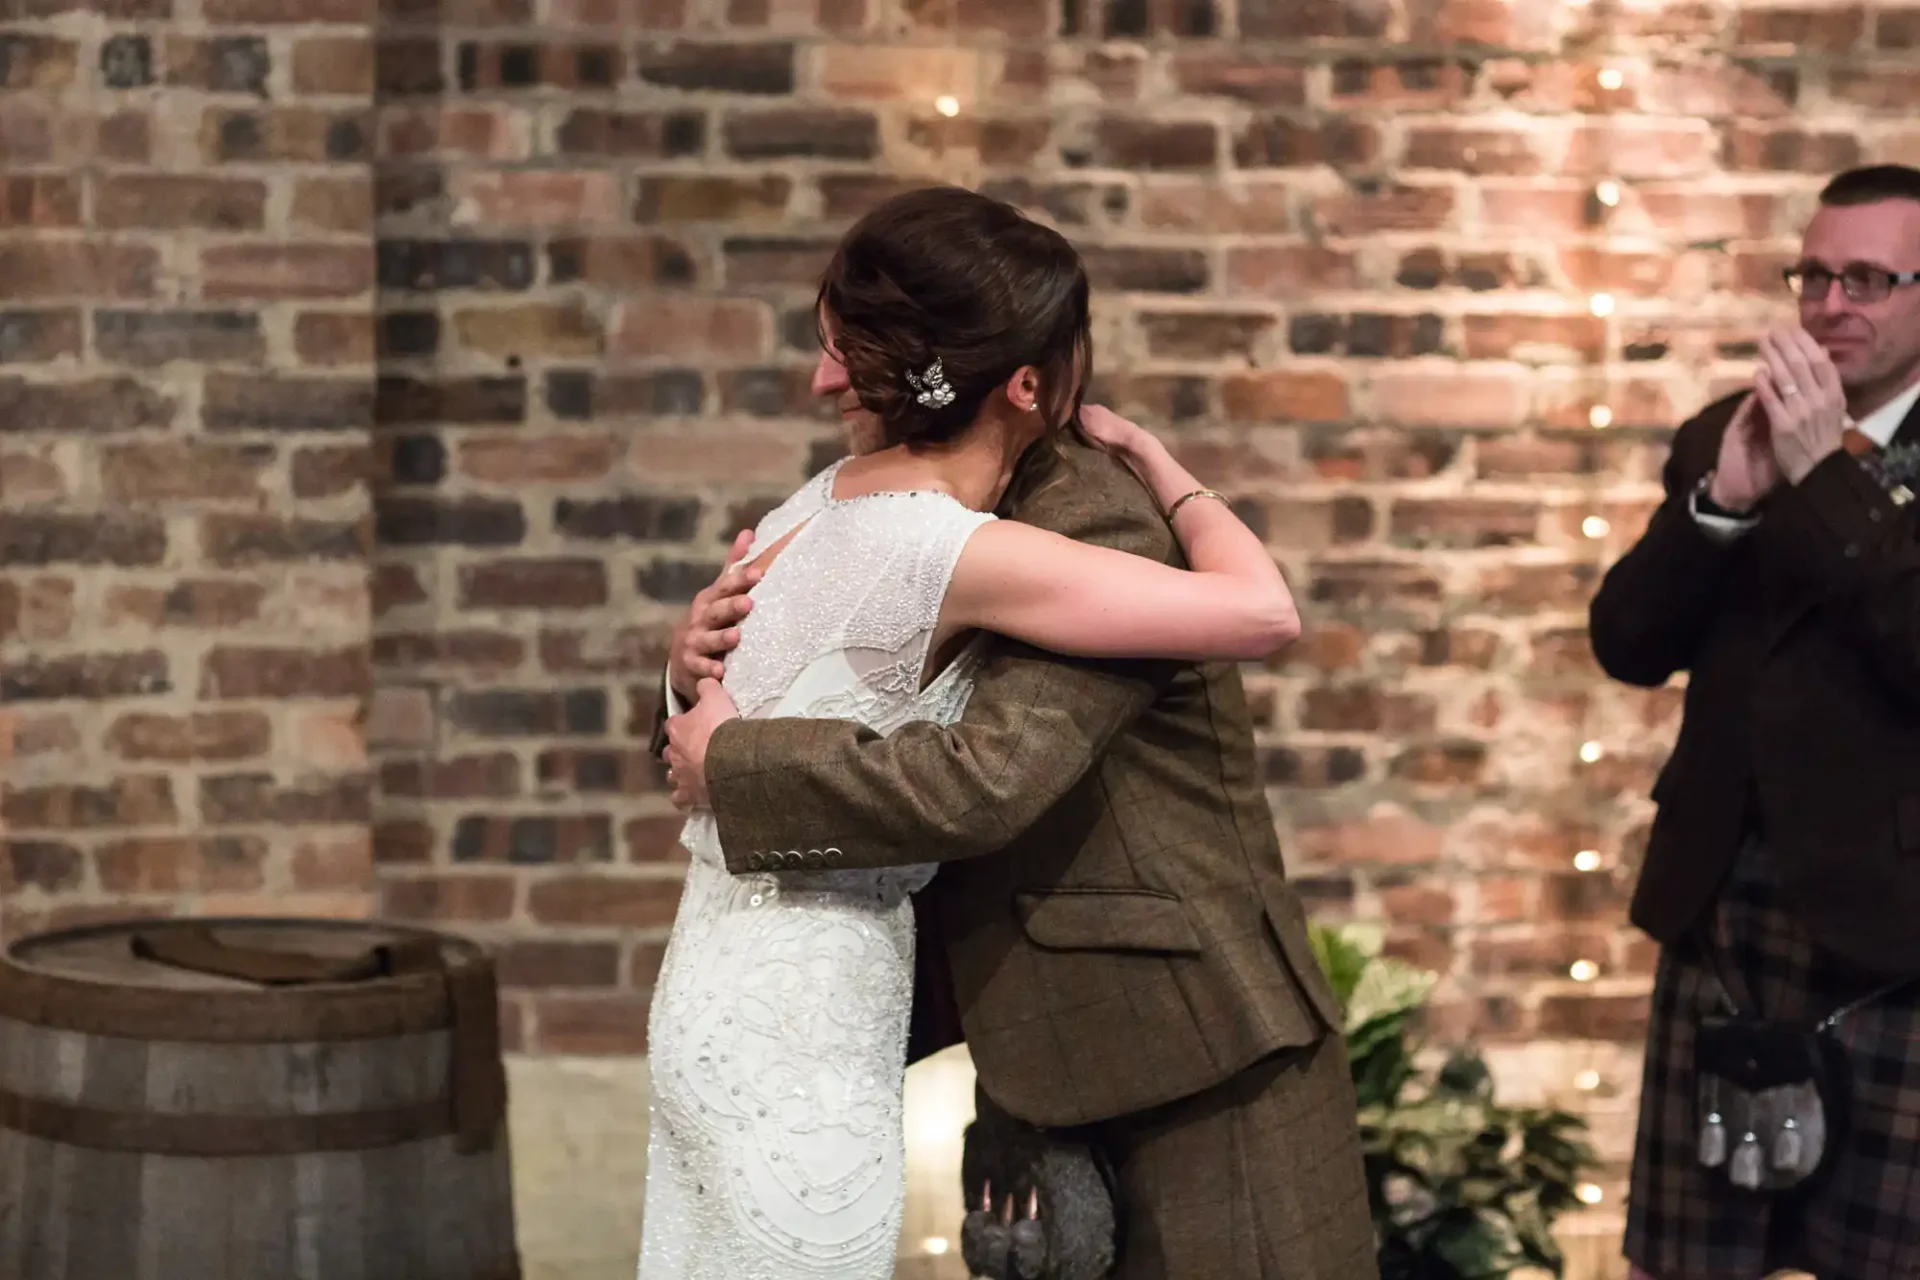 A bride and groom embrace lovingly during their wedding reception as a guest claps in the background, against a backdrop of brick walls and soft lights.